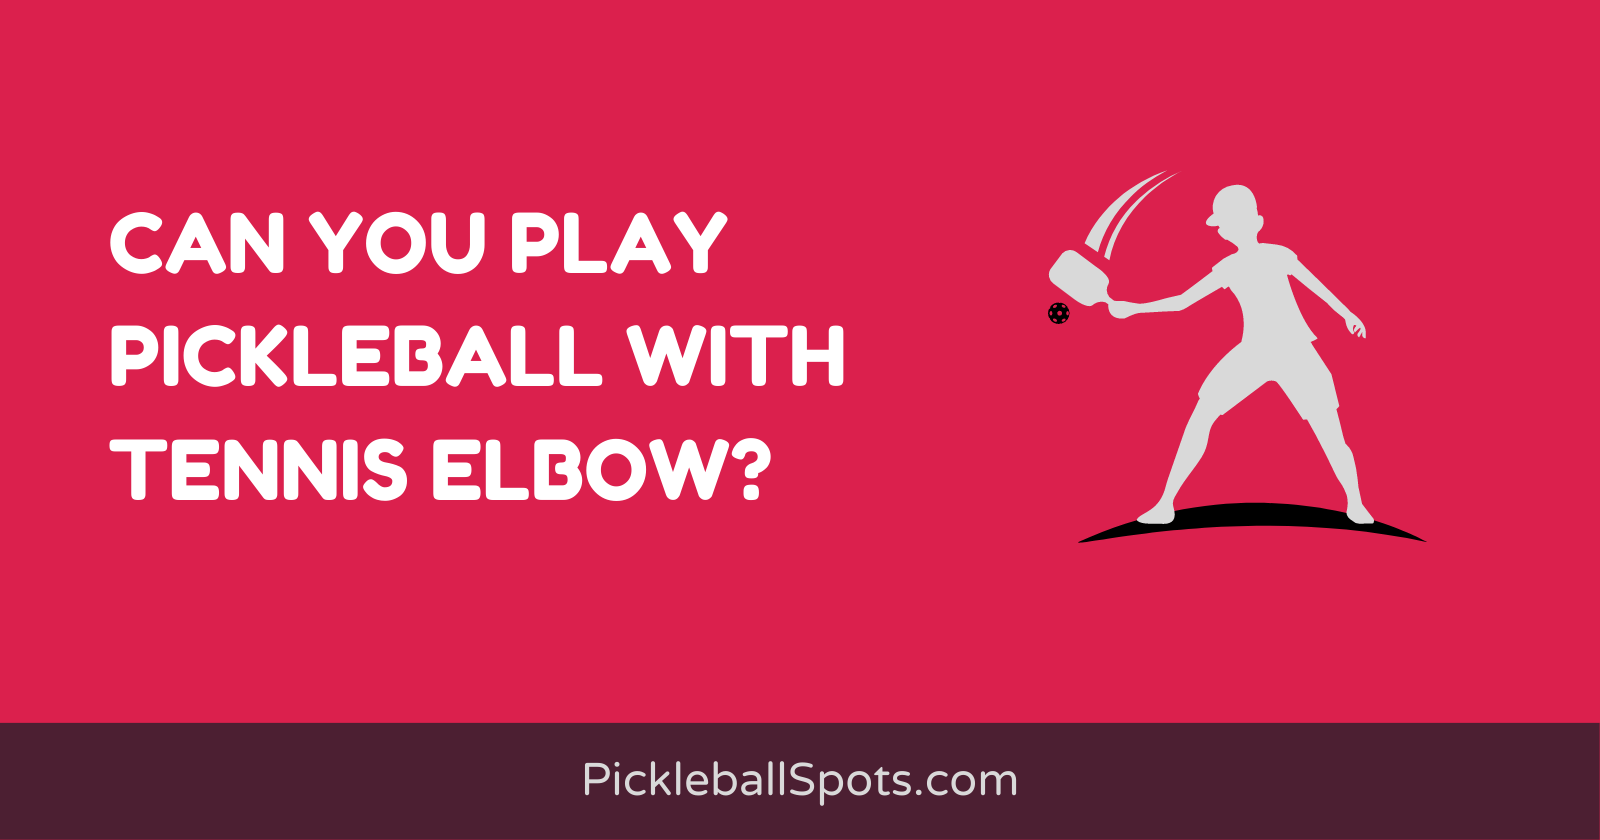 Can You Play Pickleball With Tennis Elbow